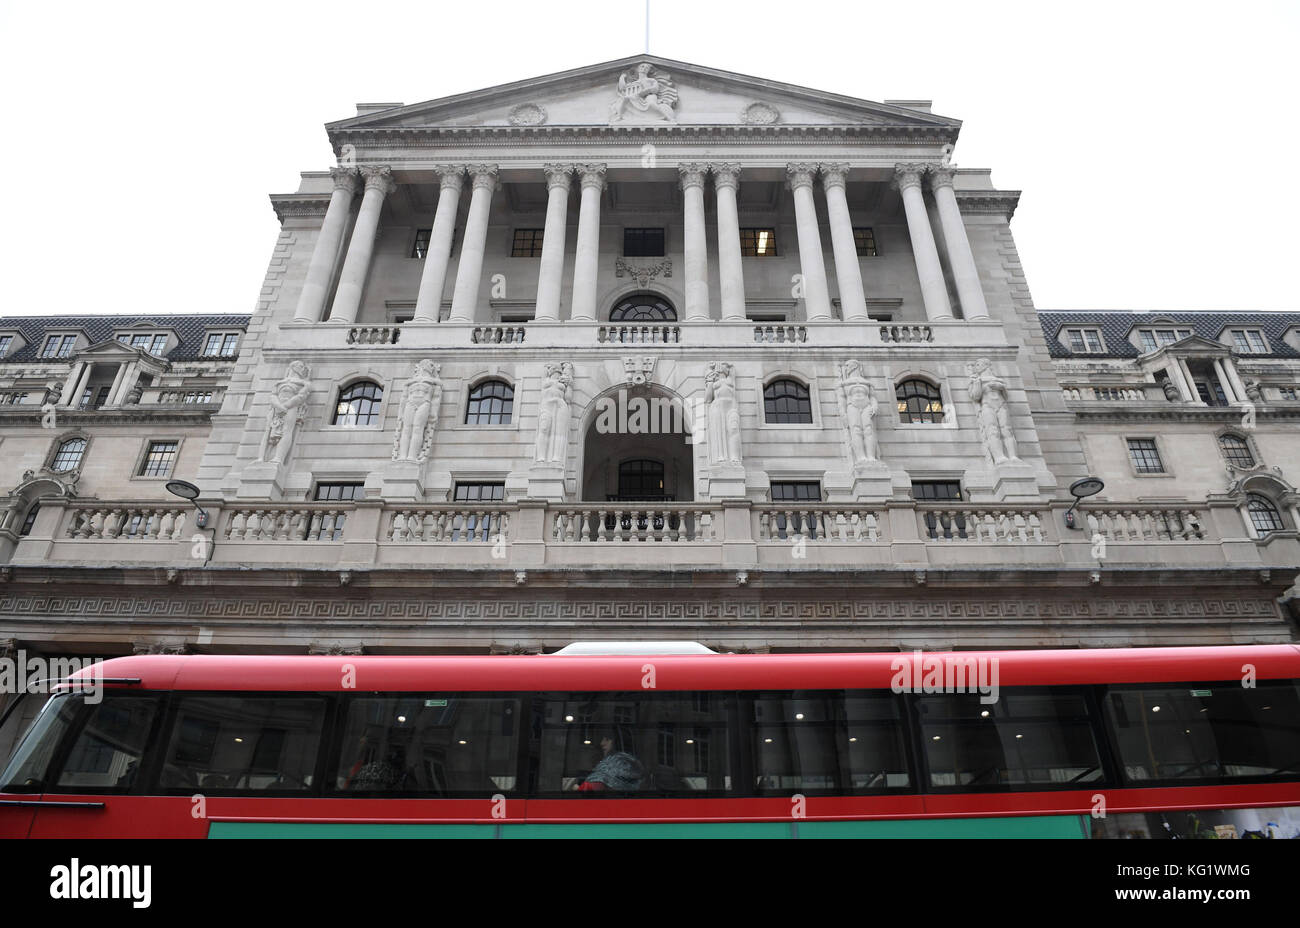 A London bus passes the Bank of England in London, which has hiked interest rates to 0.5% in the first rise for over a decade and signalled more increases are on the way as it looks to cool surging inflation. Stock Photo